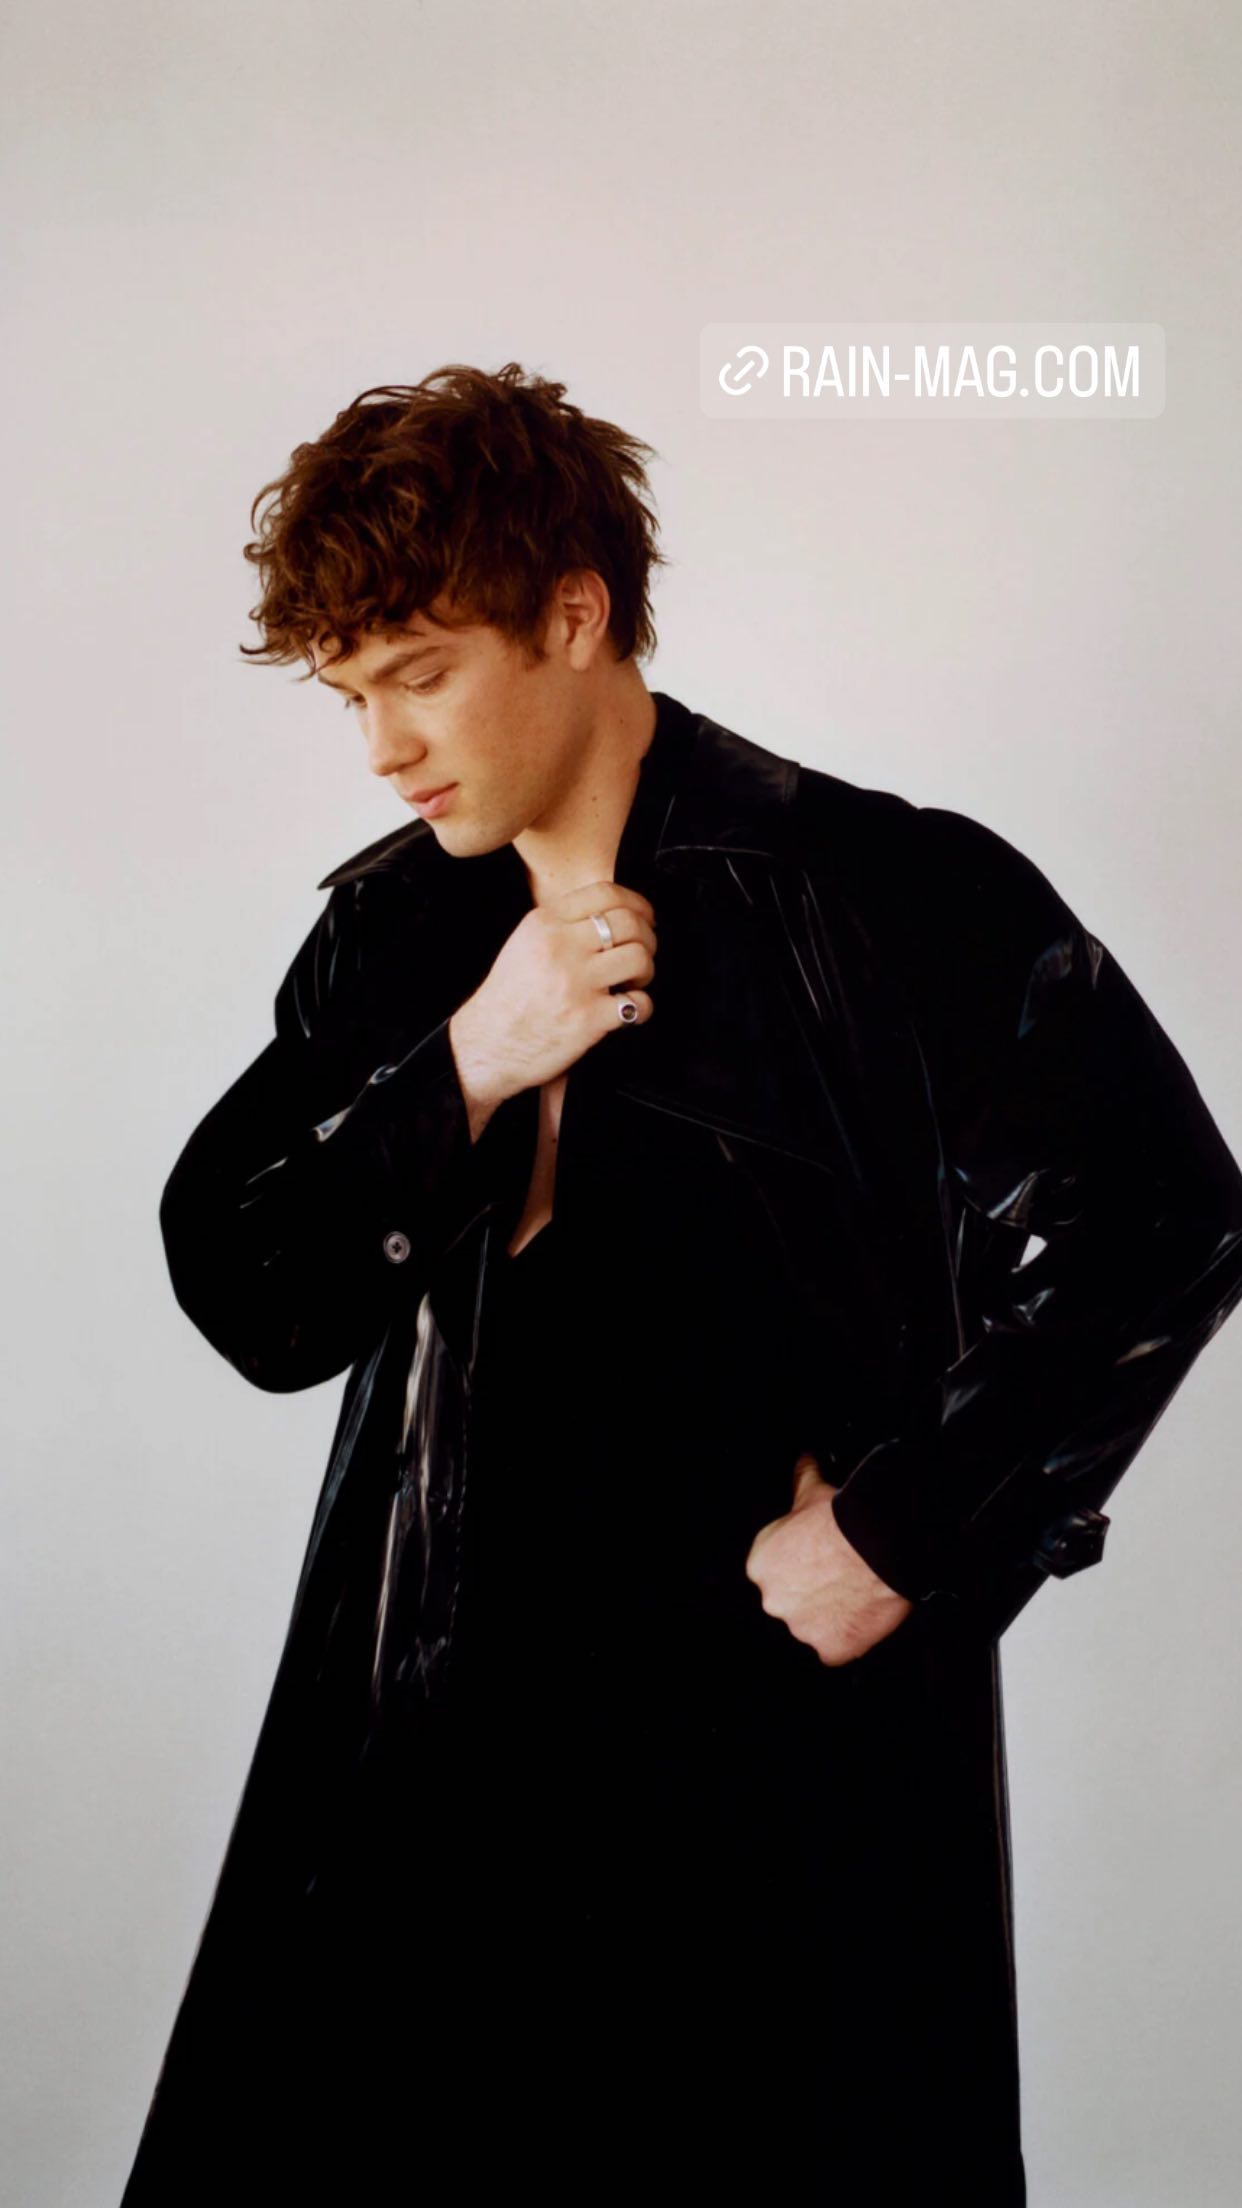 General photo of Connor Jessup